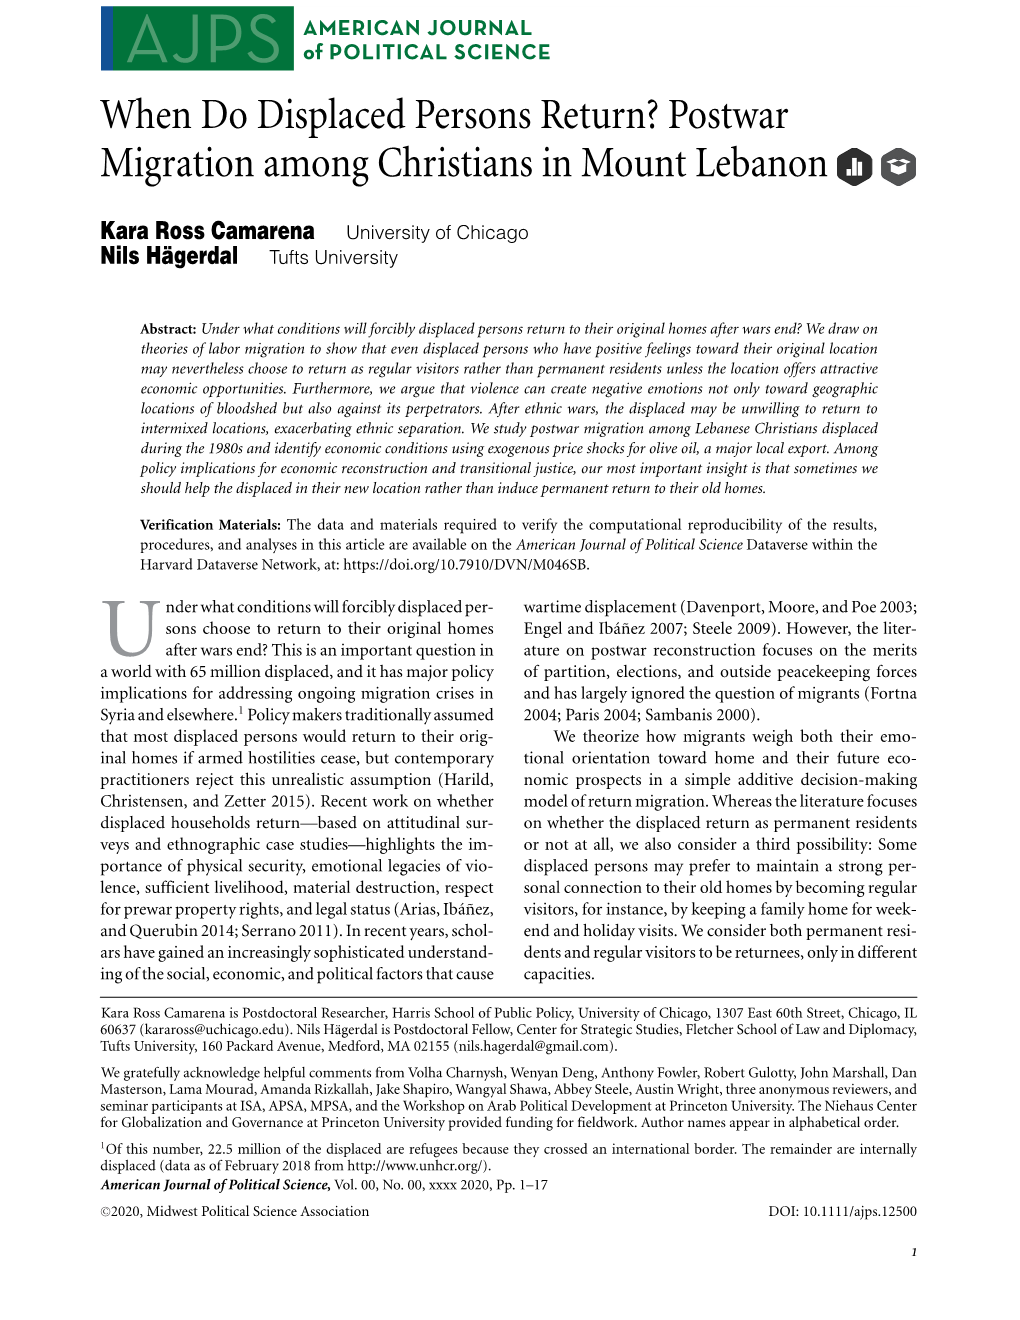 When Do Displaced Persons Return? Postwar Migration Among Christians in Mount Lebanon